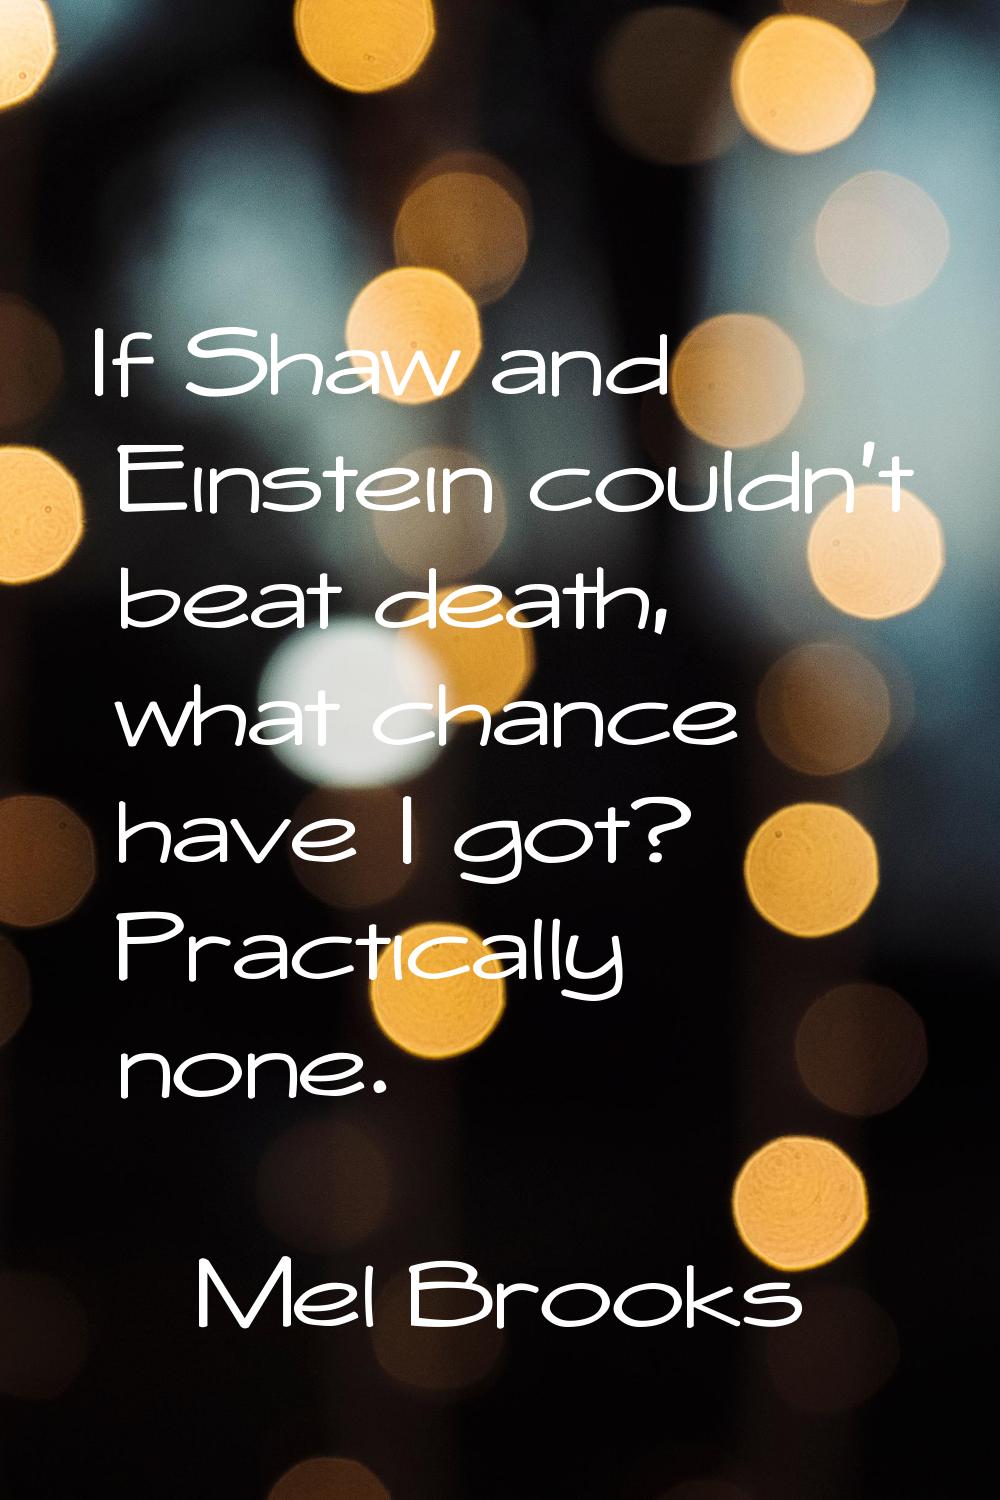 If Shaw and Einstein couldn't beat death, what chance have I got? Practically none.